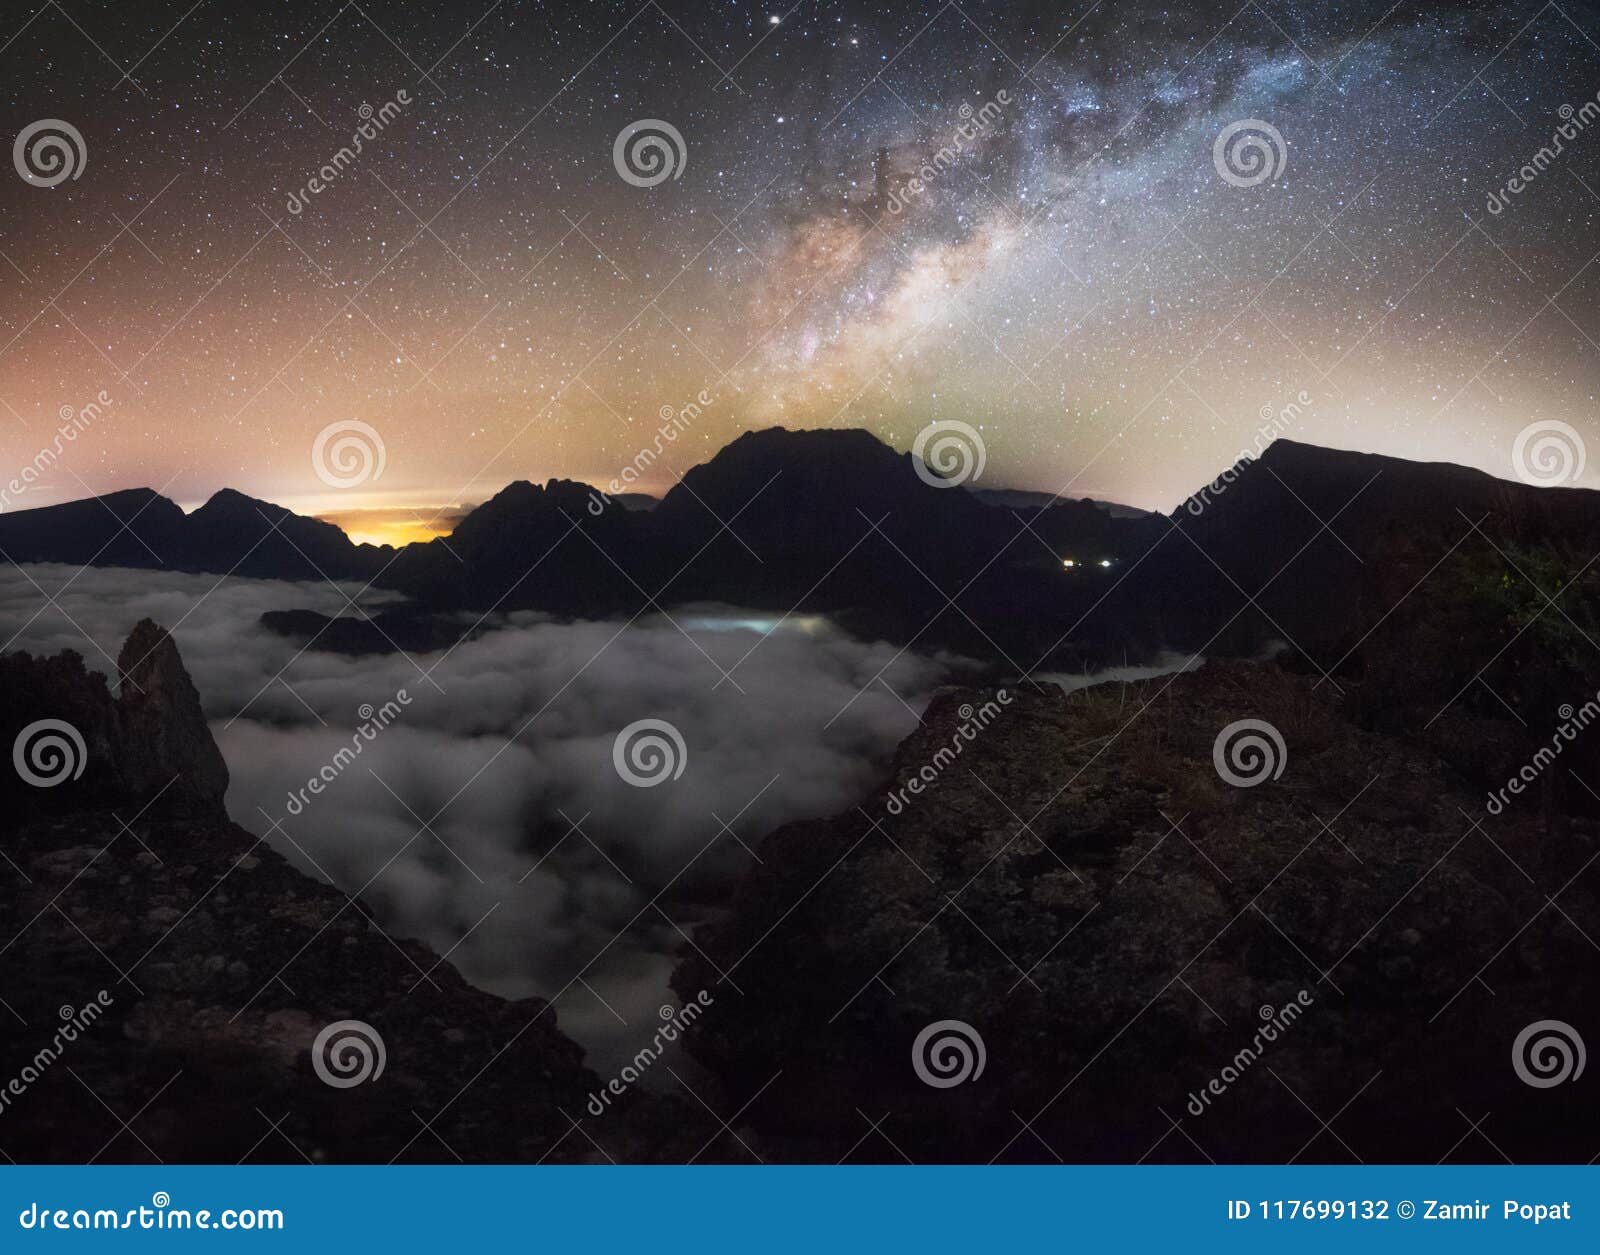 milkyway at maido over a sea of clouds in saint paul, reunion island